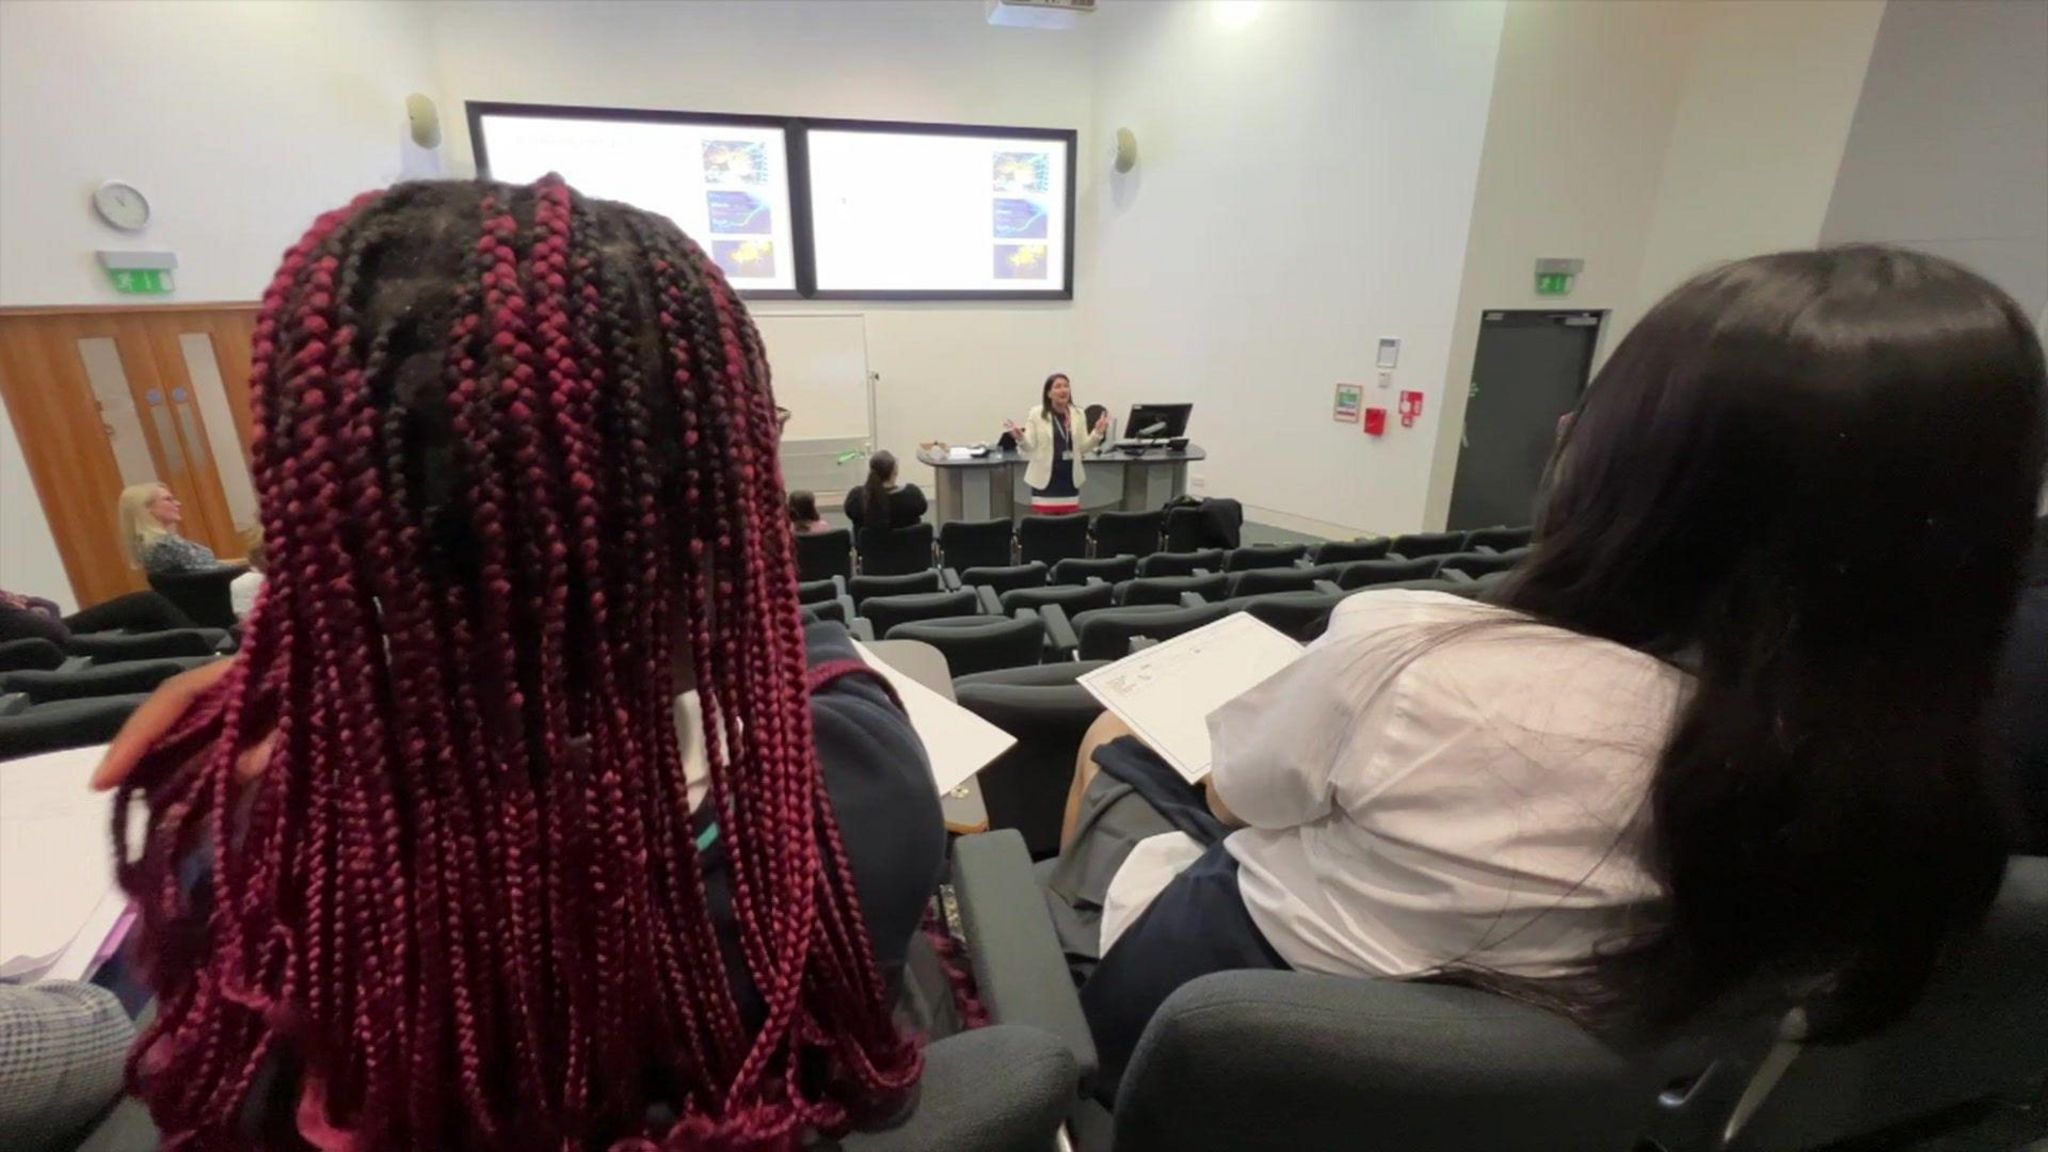 Back of heads of two female students watching a lecture